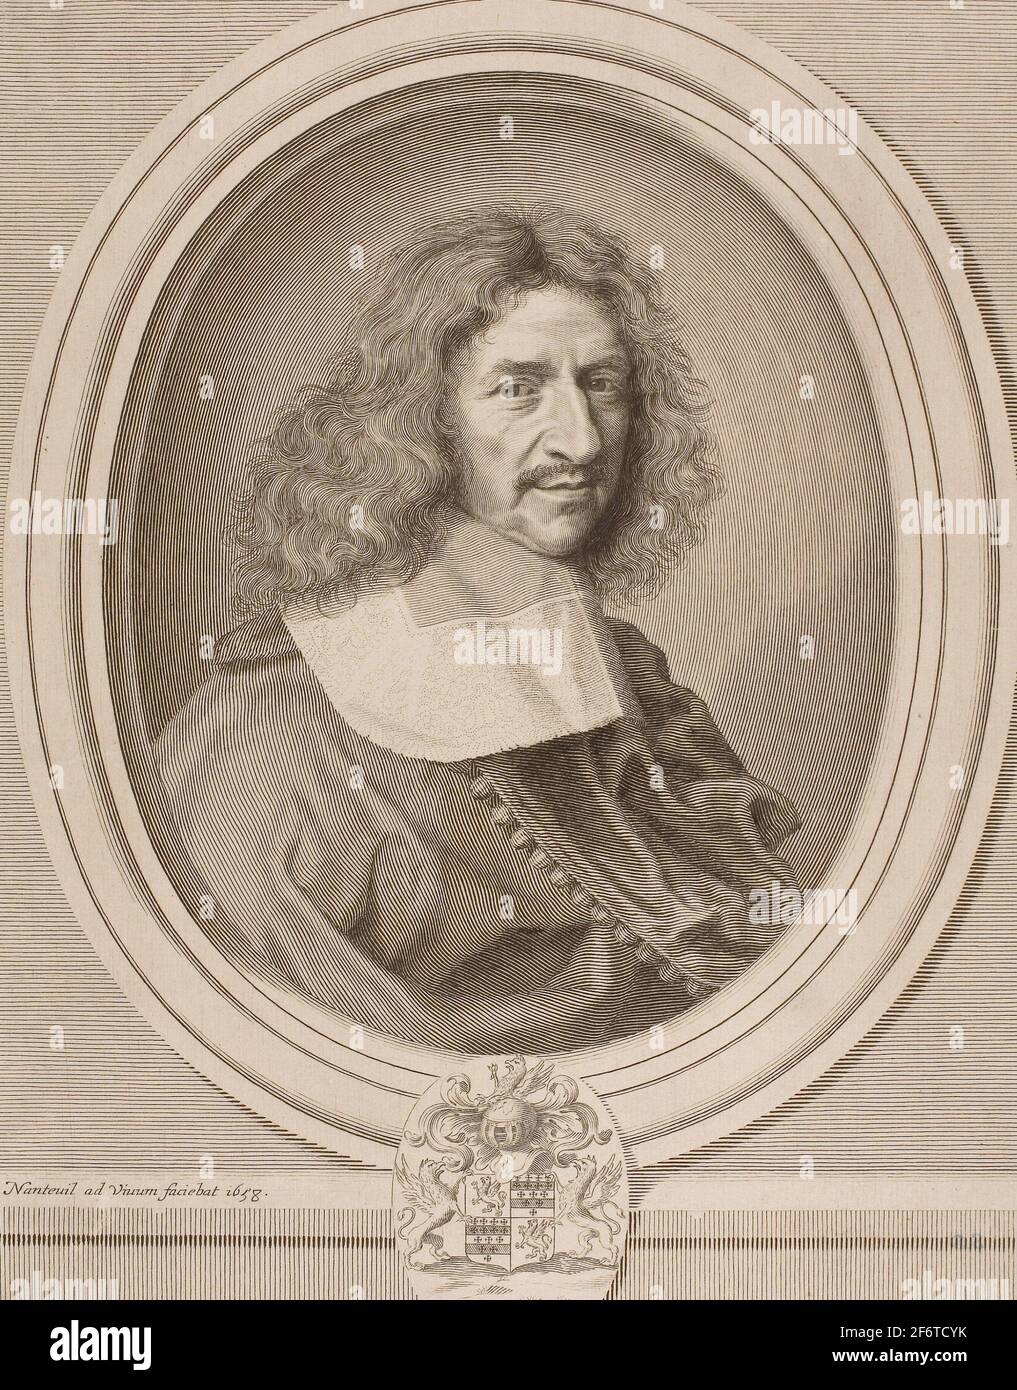 Author: Robert Nanteuil. Louis Hesselin - 1658 - Robert Nanteuil French, 1623-1678. Engraving on paper. France. Stock Photo